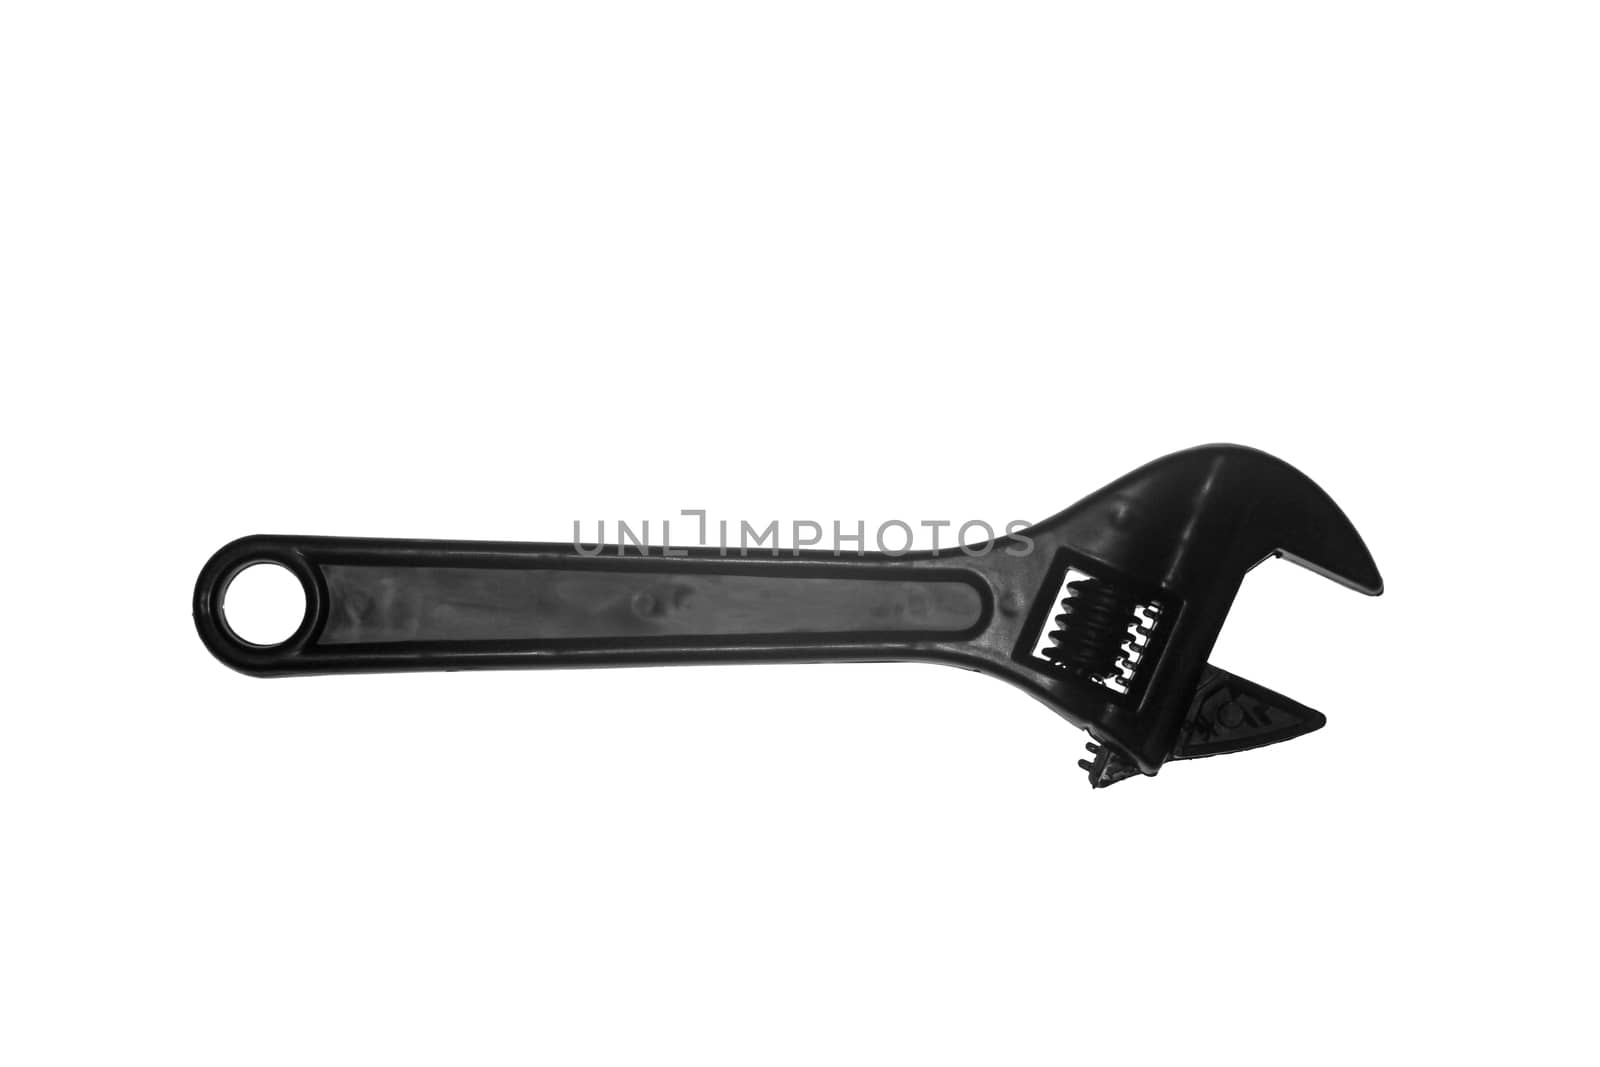 Work tool, Adjustable Wrench by yands